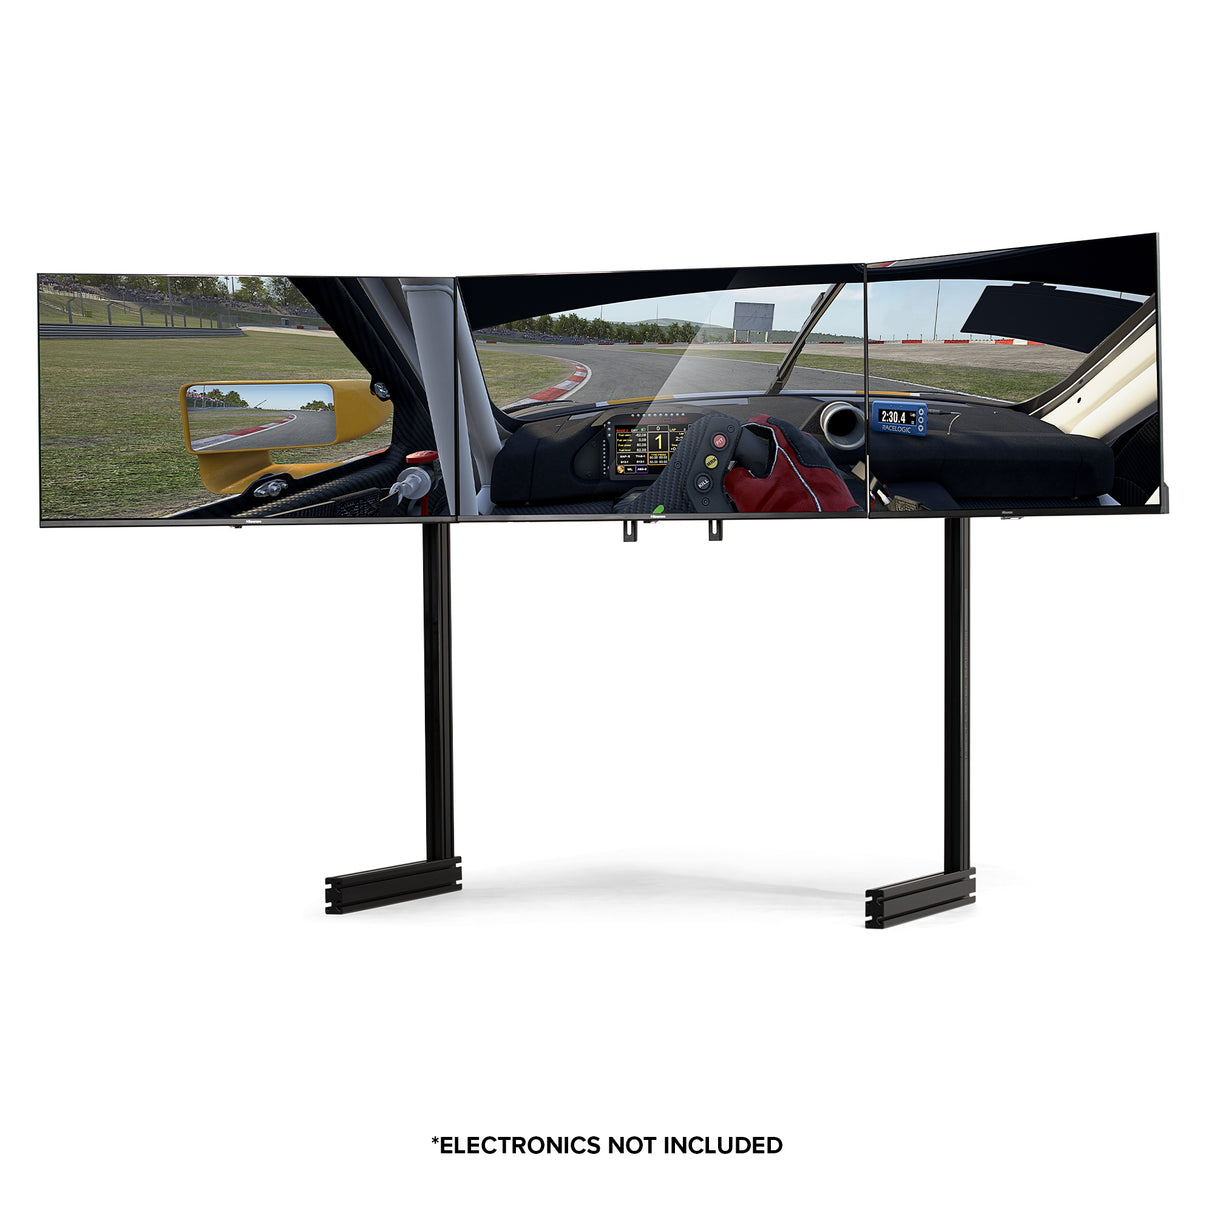 Next Level Racing - Elite Free Standing Triple Monitor Add-on - Black Edition